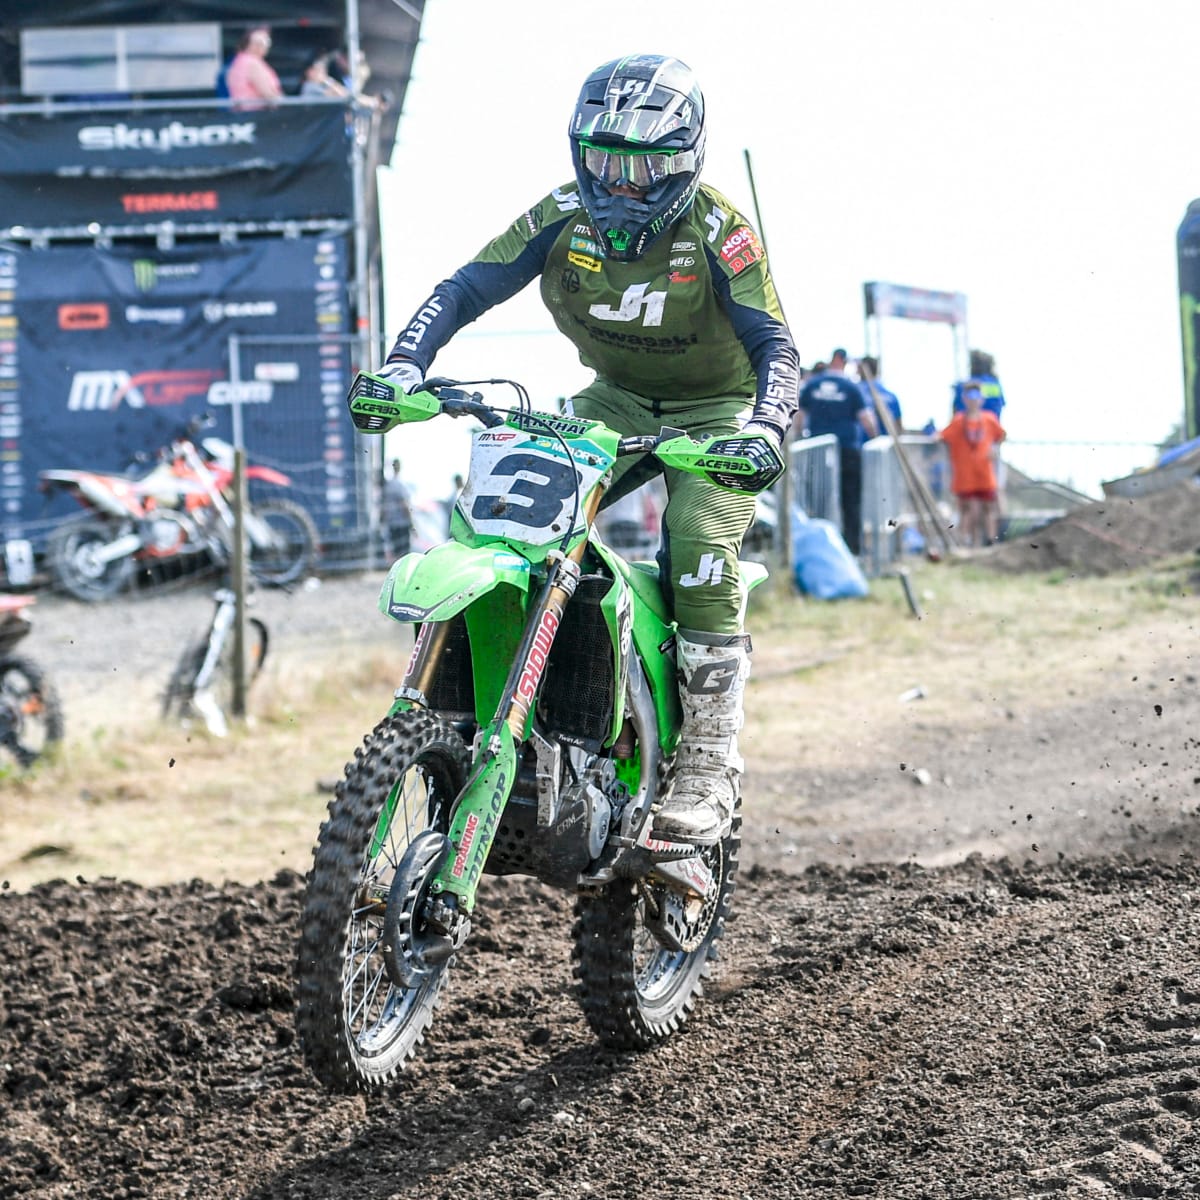 MXGP Sumbawa, Race 1 Free Live Stream Motocross Online - How to Watch and Stream Major League and College Sports